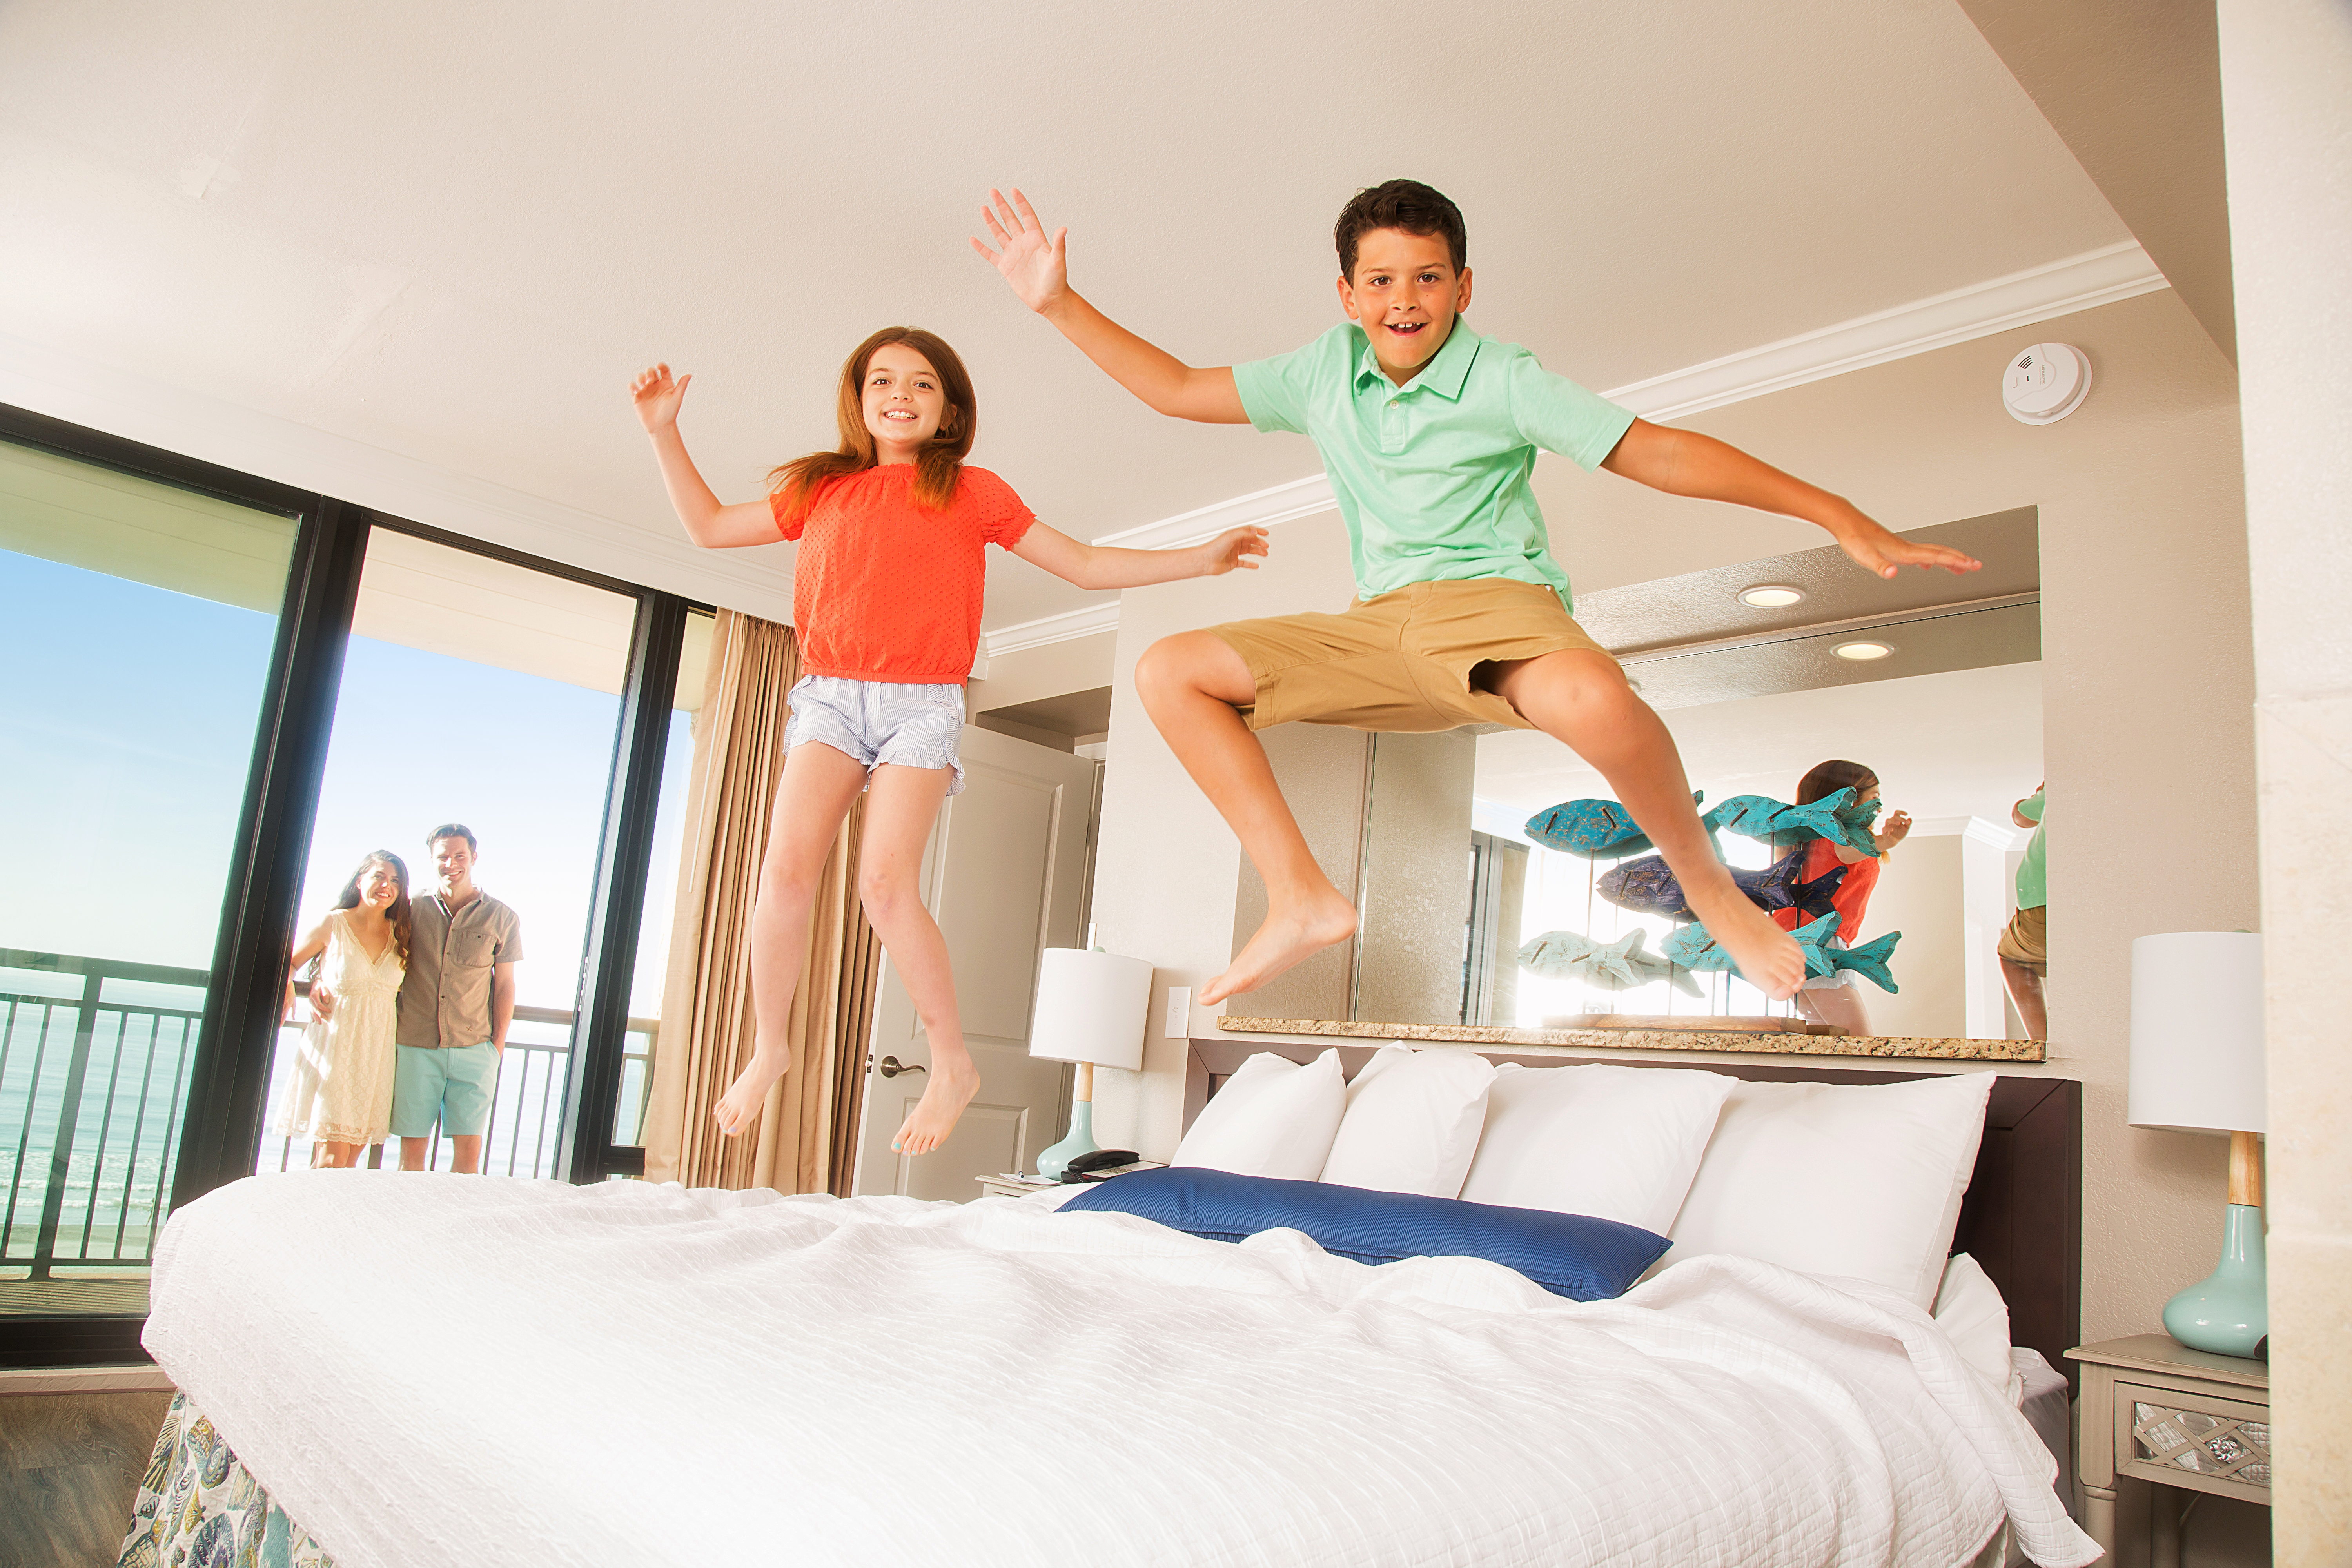 kids jumping on bed in room at caravelle resort